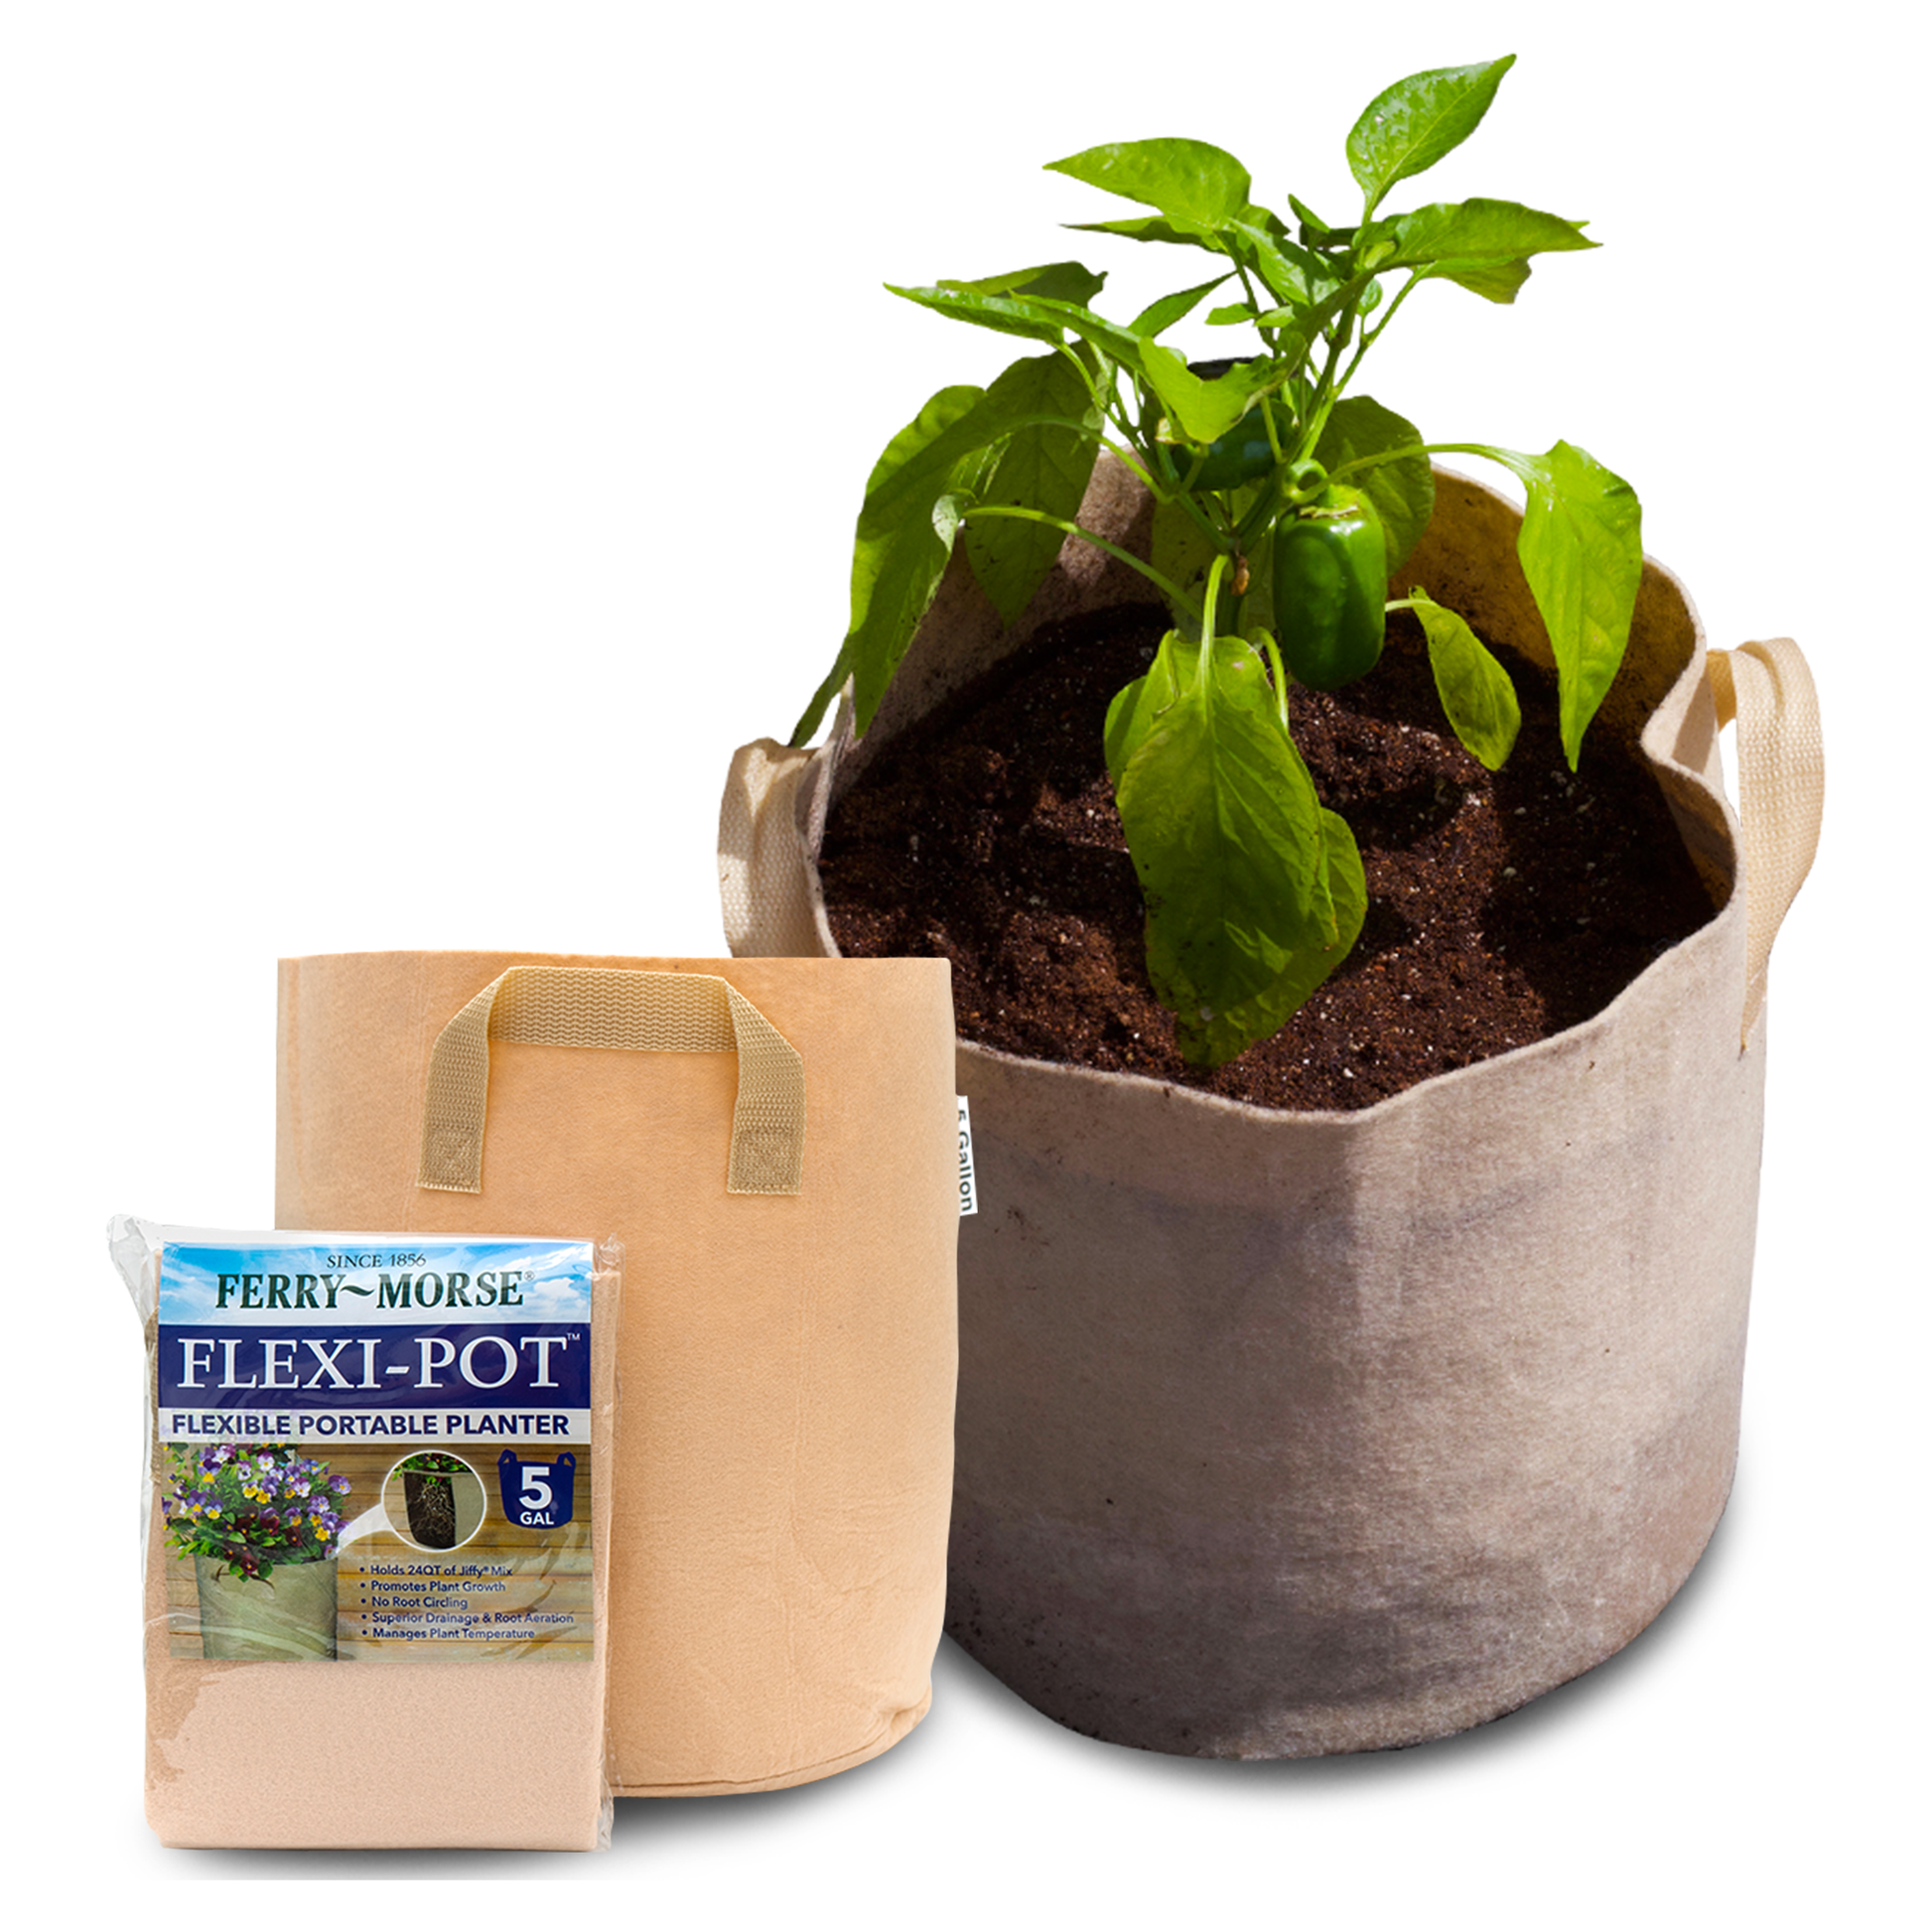 Ferry-Morse Flexible Fabric Planter with Handles for easily growing and transporting your plants outdoors.